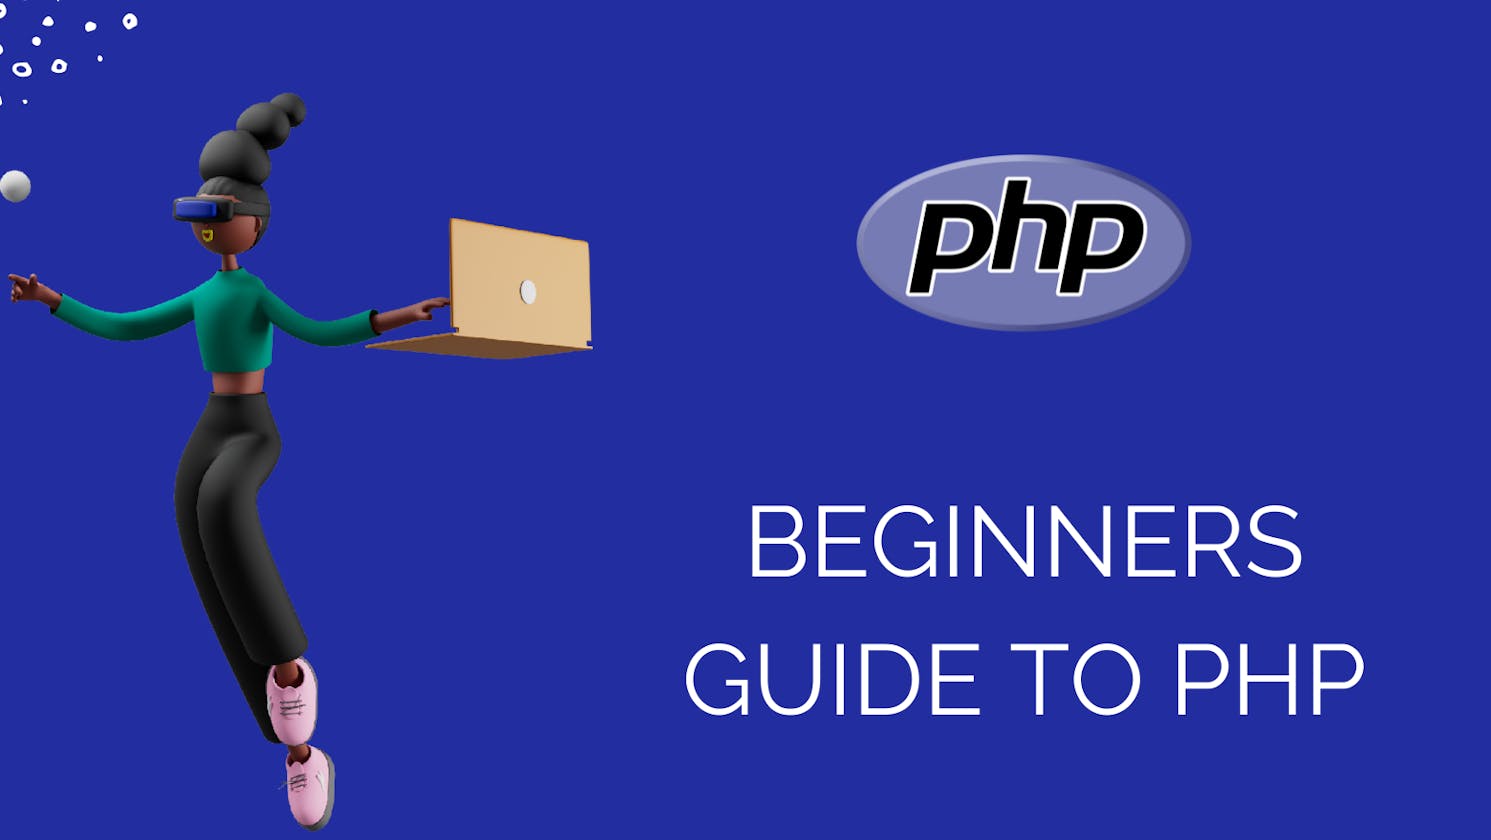 A Beginners Guide to PHP(Hypertext Preprocessor): Part 1